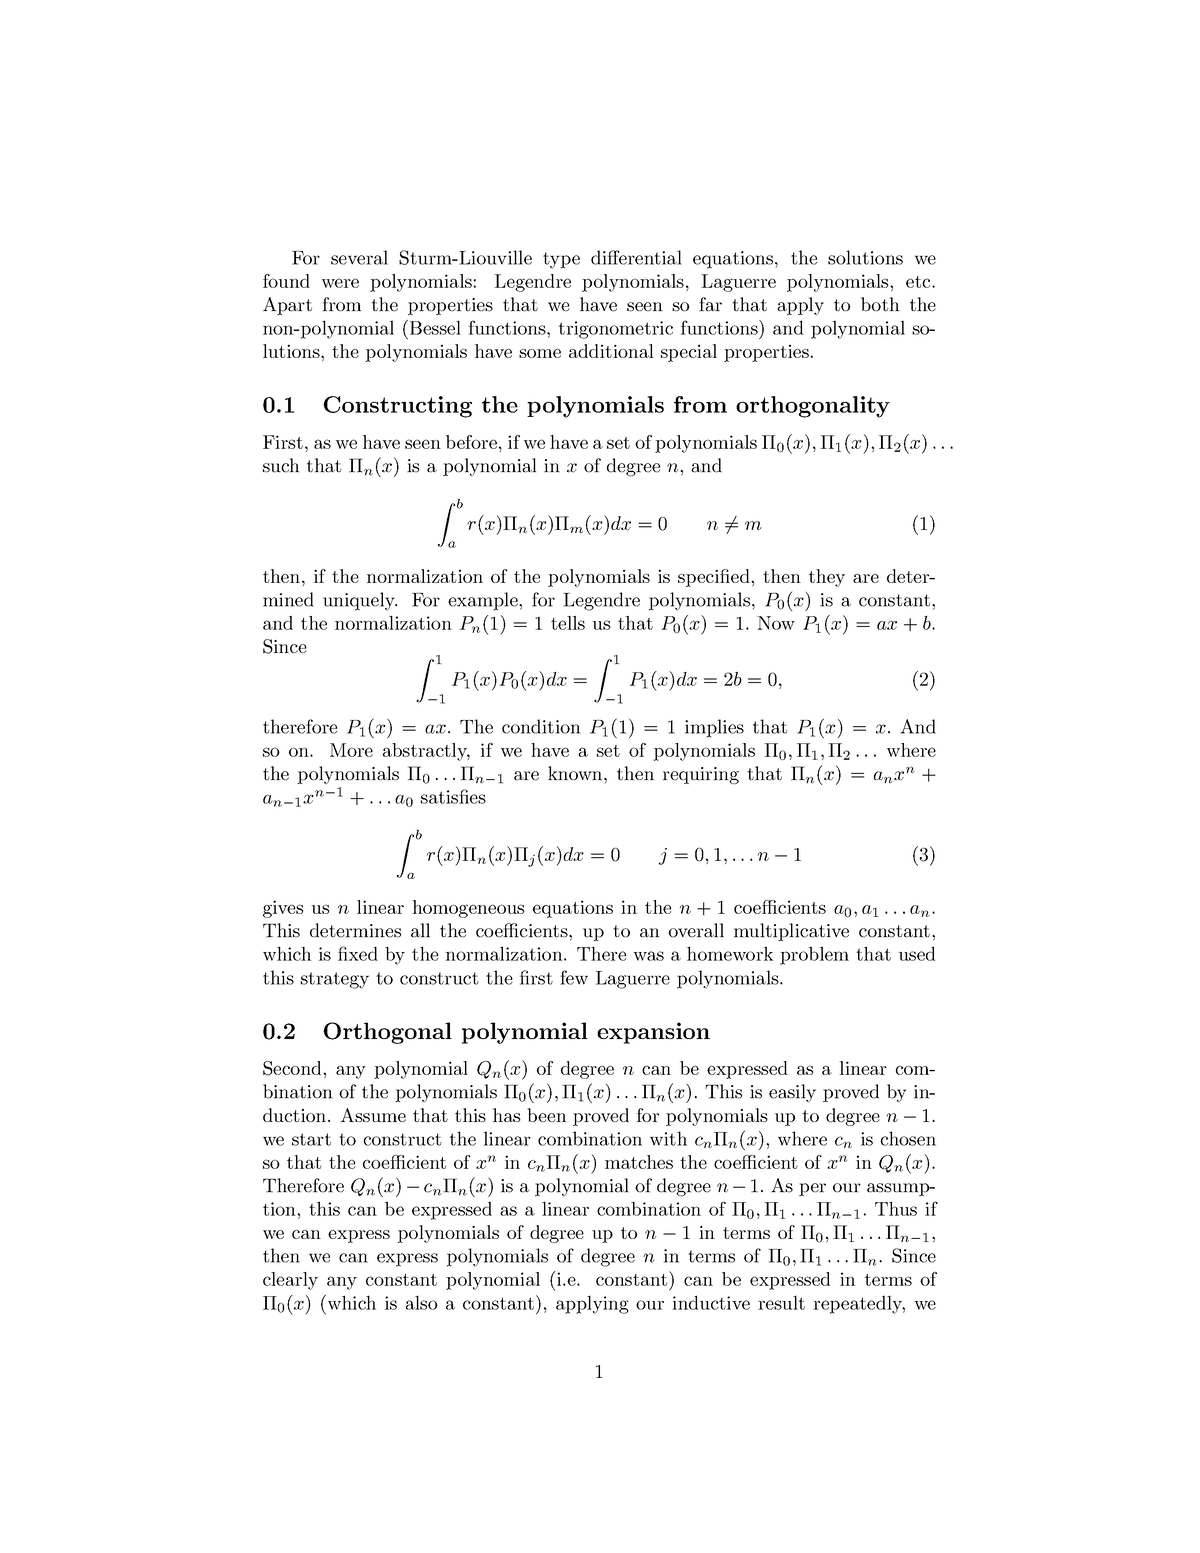 Optional Orthogonal Polynomials - For several Sturm-Liouville type ...